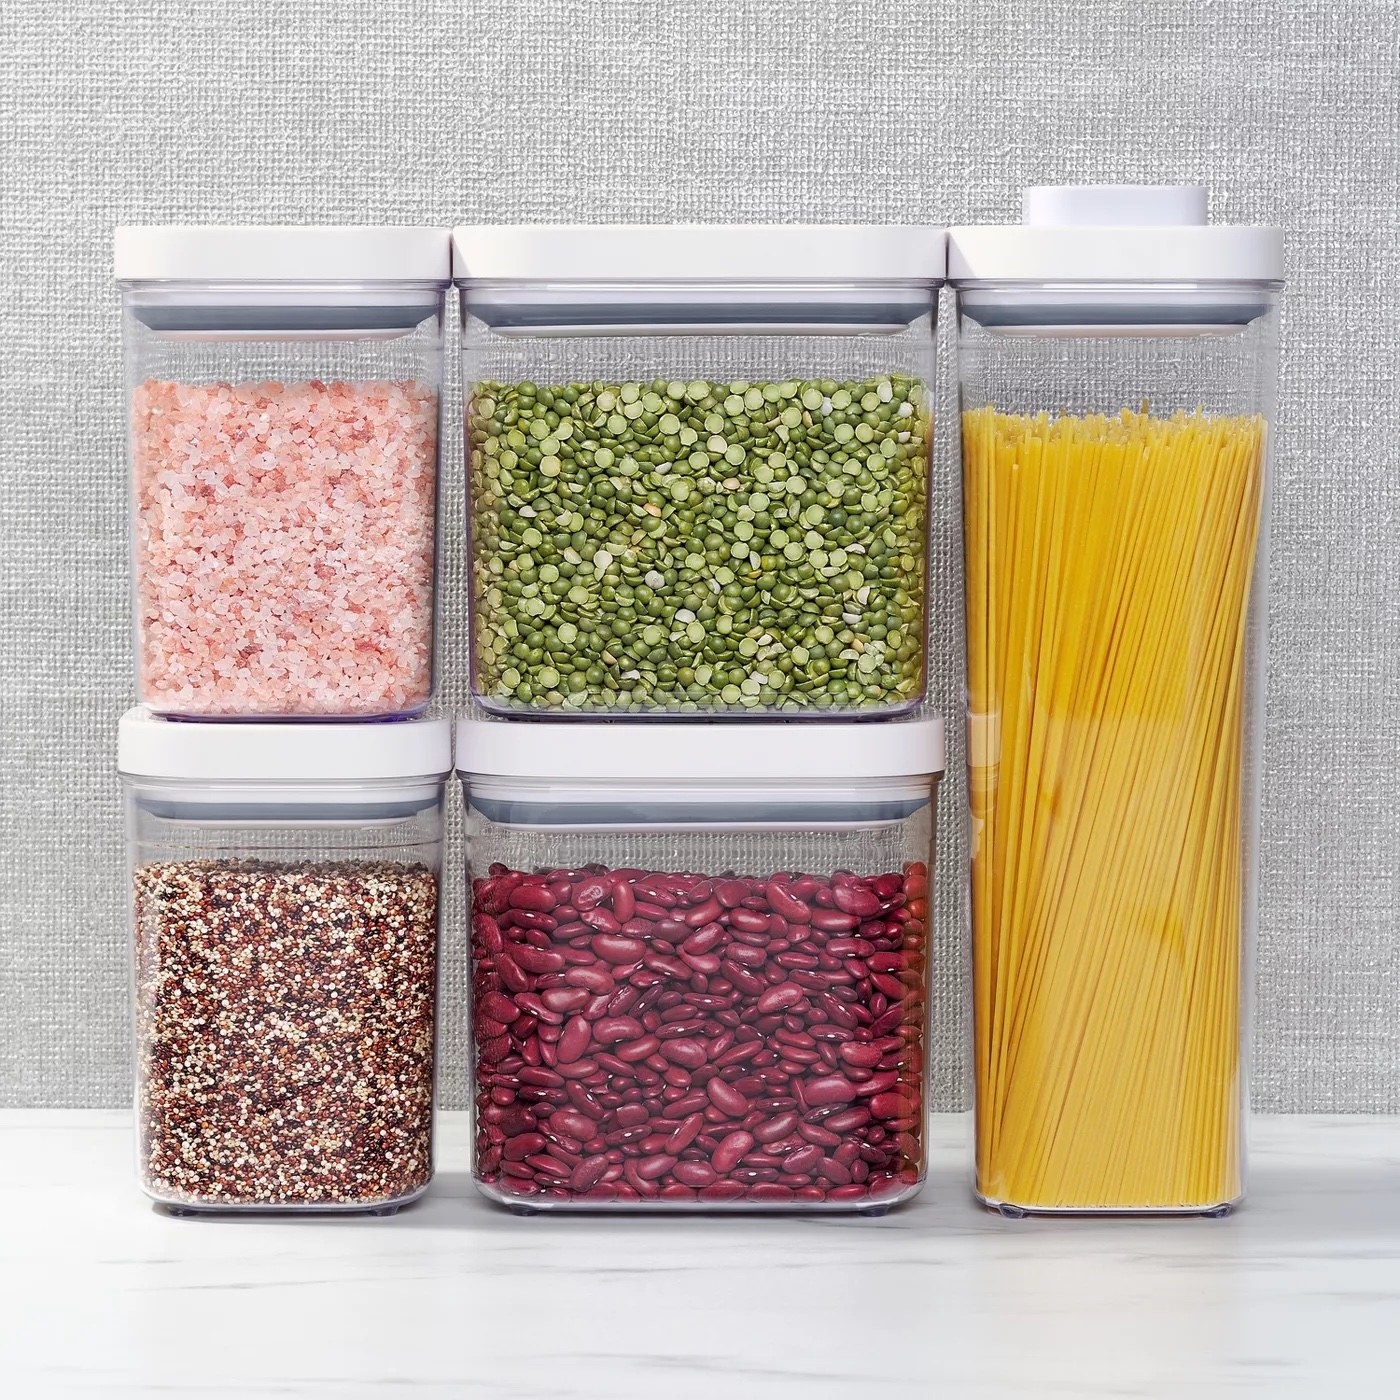 pasta, beans, and grains in the containers